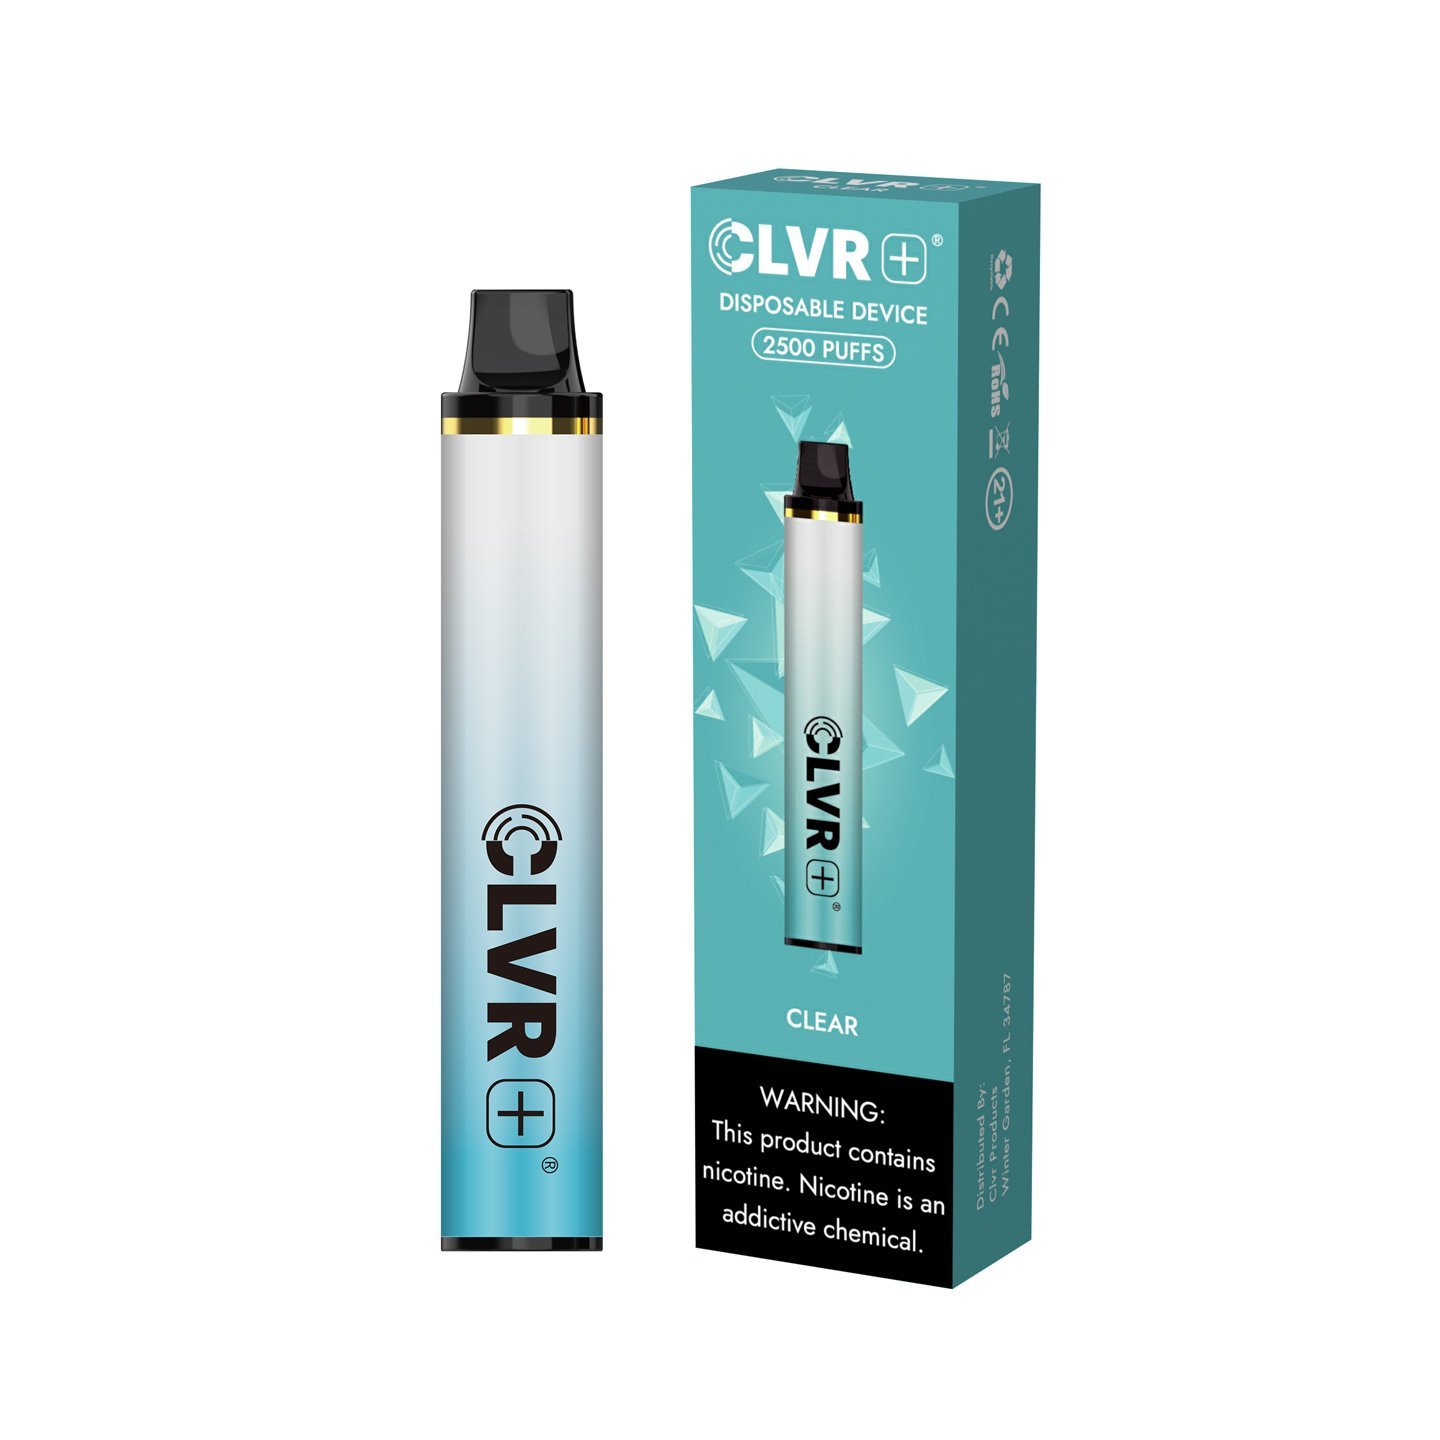 CLVRPlus Disposable Device (Clear- 2500 Puffs)